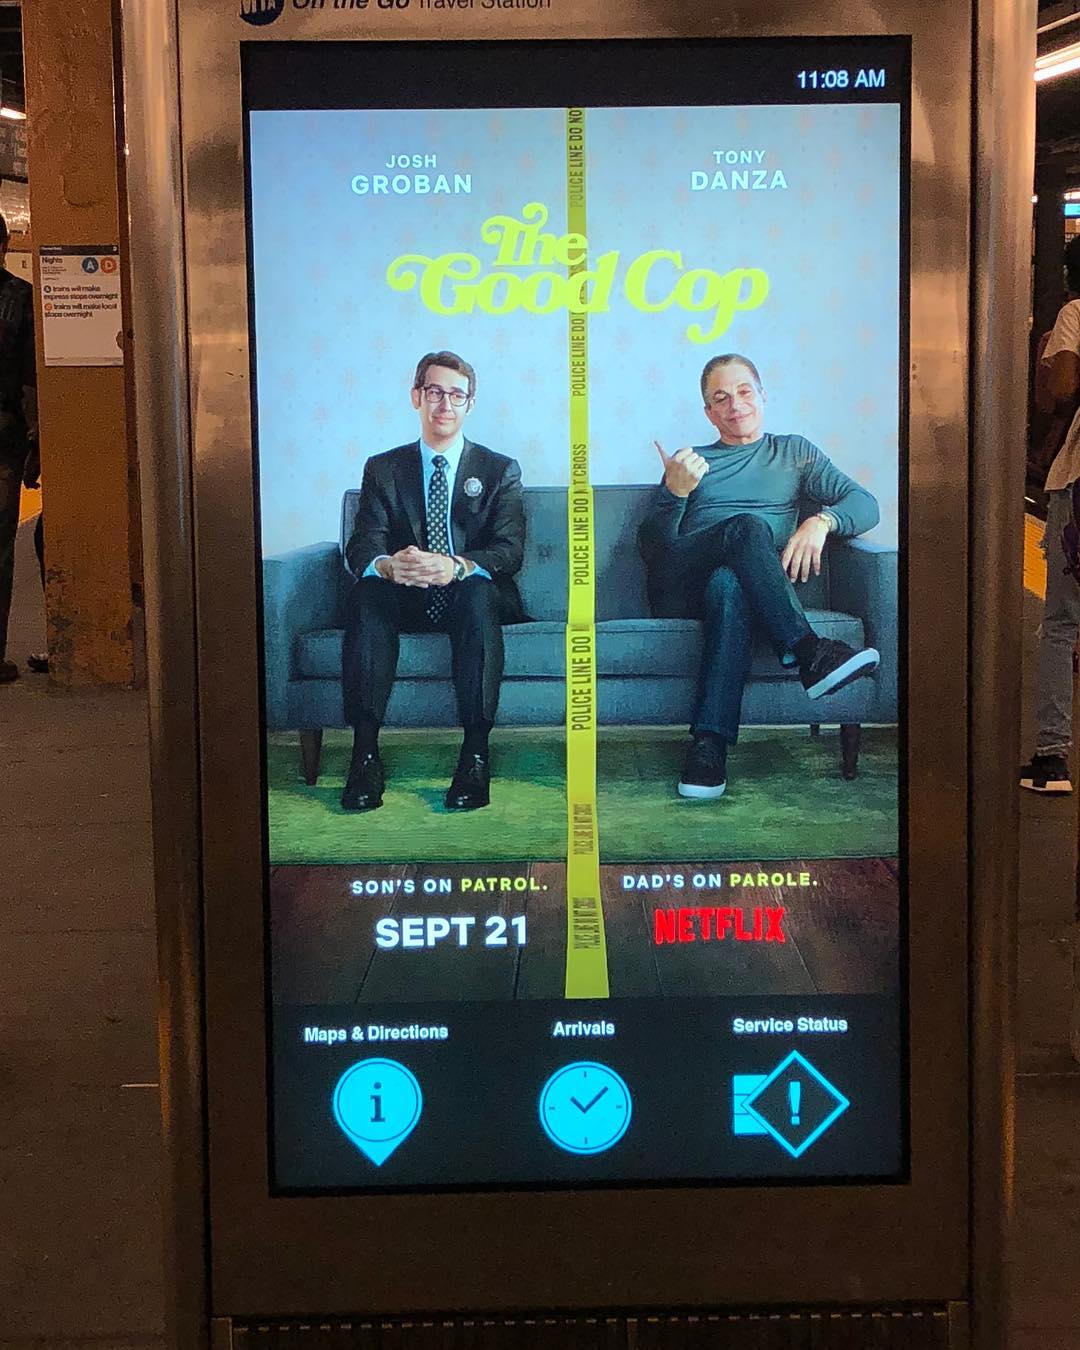 Whaaaaaat it’s happening holy crappola. Thanks @ormatias for snapping this picture! So exciting. #sonsonpatrol #bahaha #atrainrepresent #ciaofromitaly #thegoodcop #sept21 #netflix